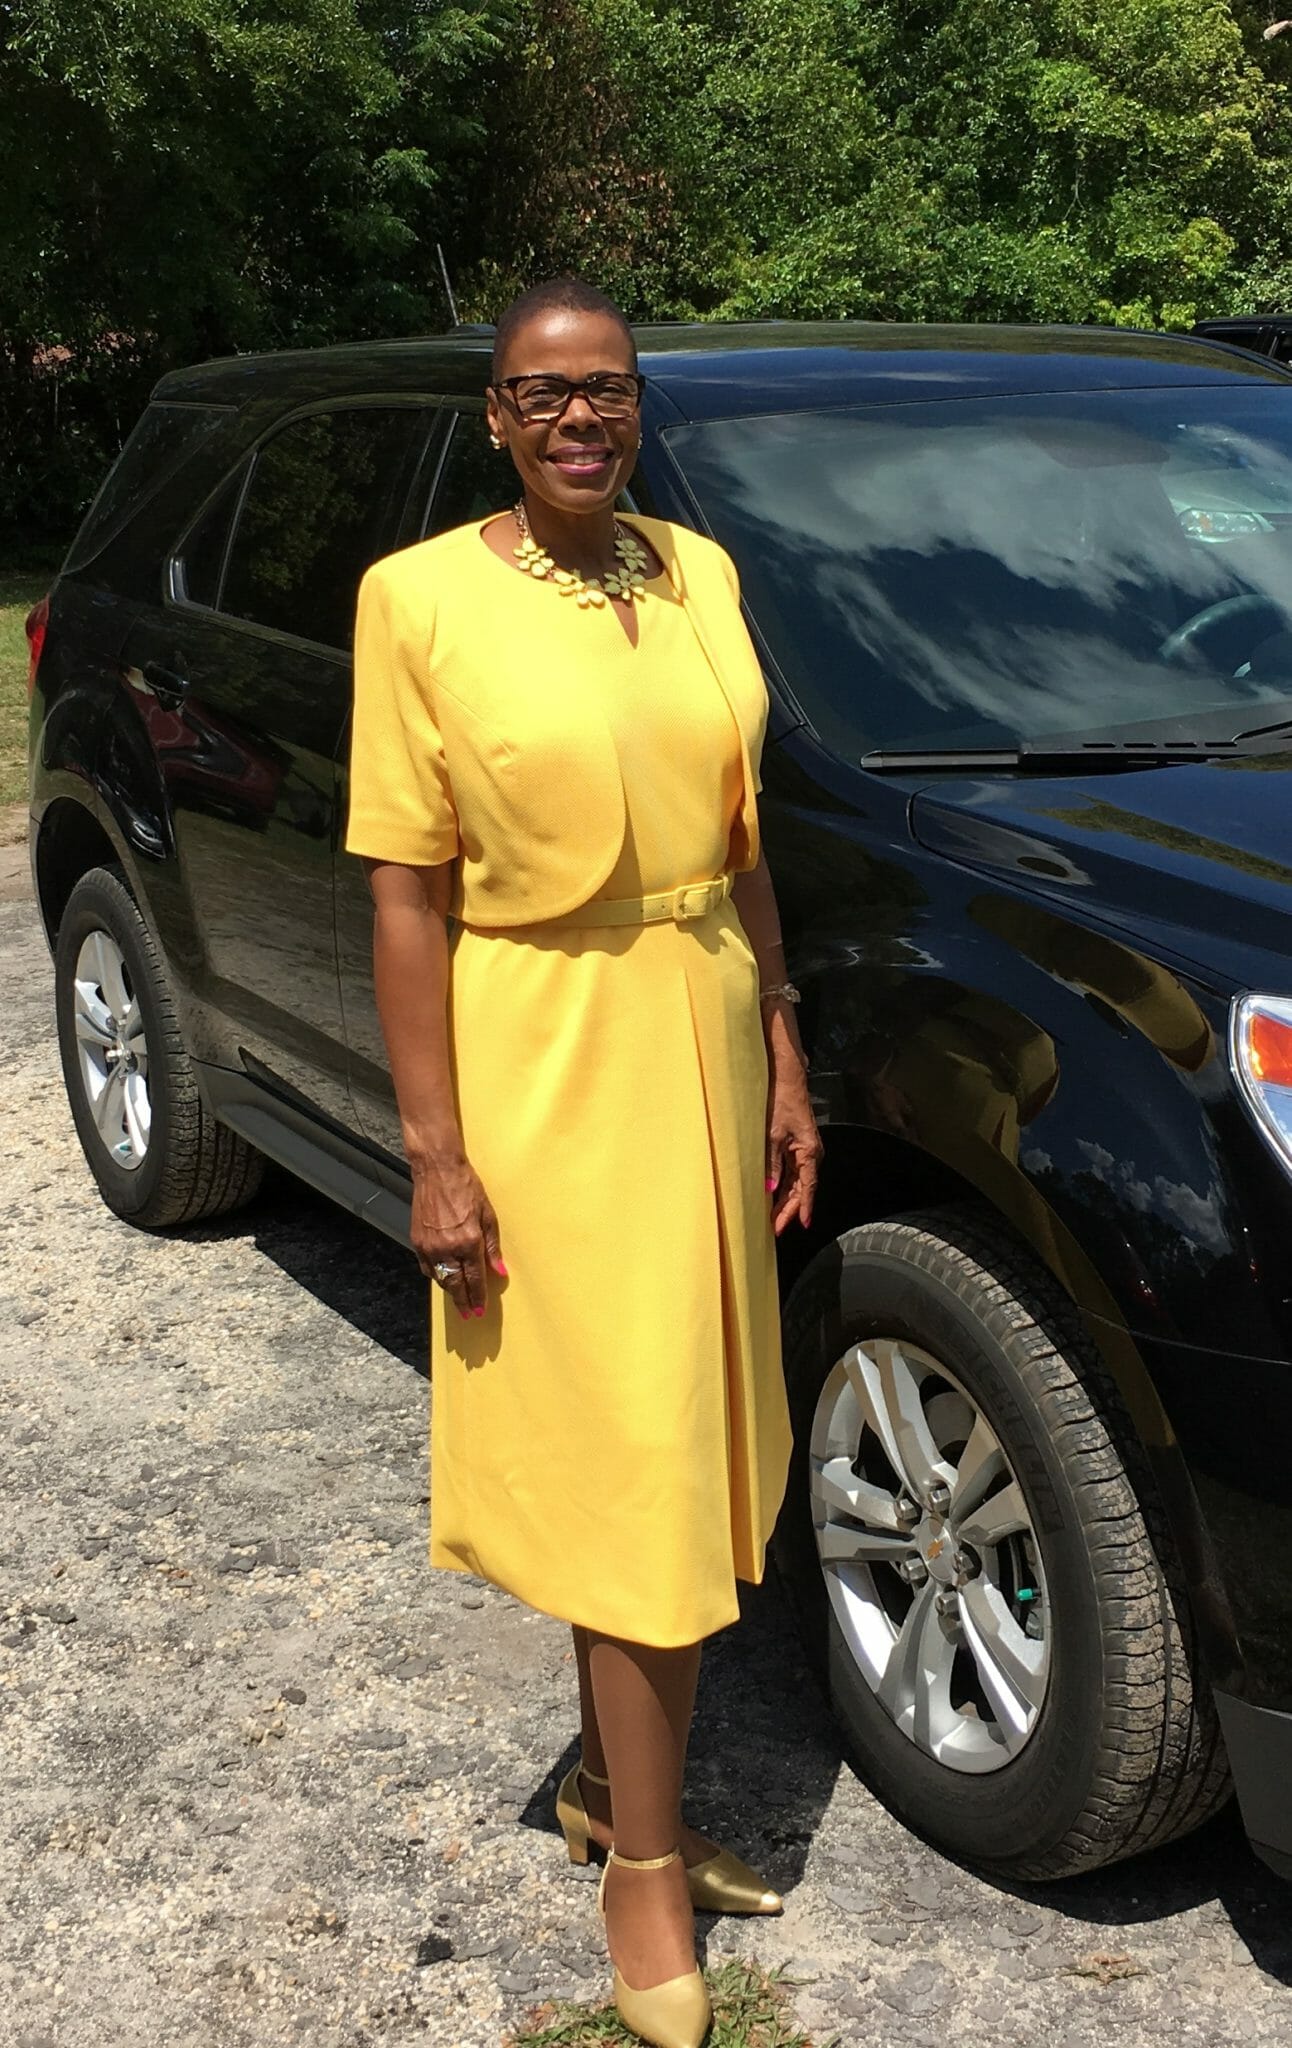 Ashro Woman of the Week, Carolyn, an African-American woman with short hair, wearing a yellow jacket dress.